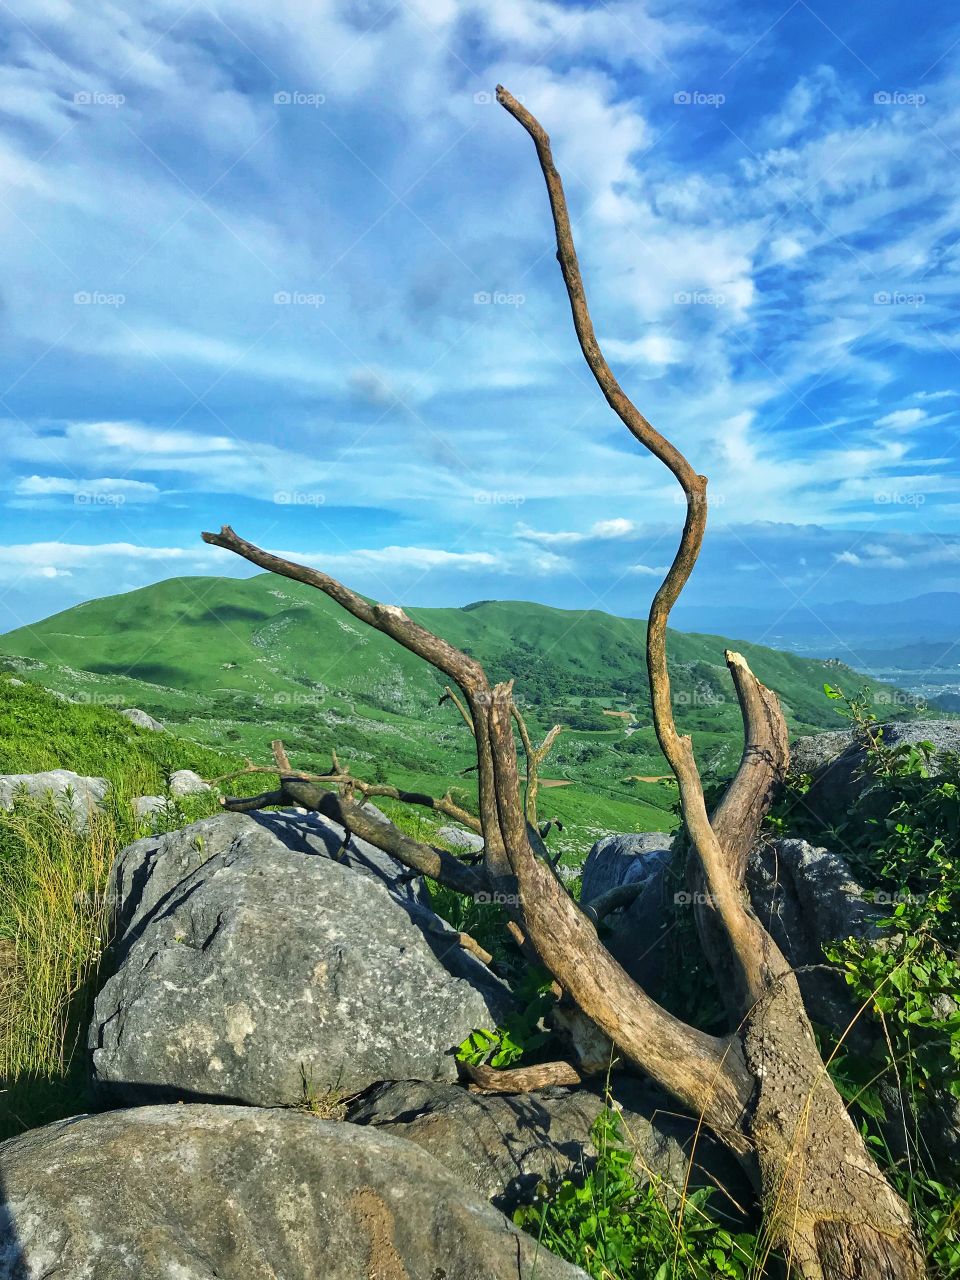 Just an old tree at the top of the mountain